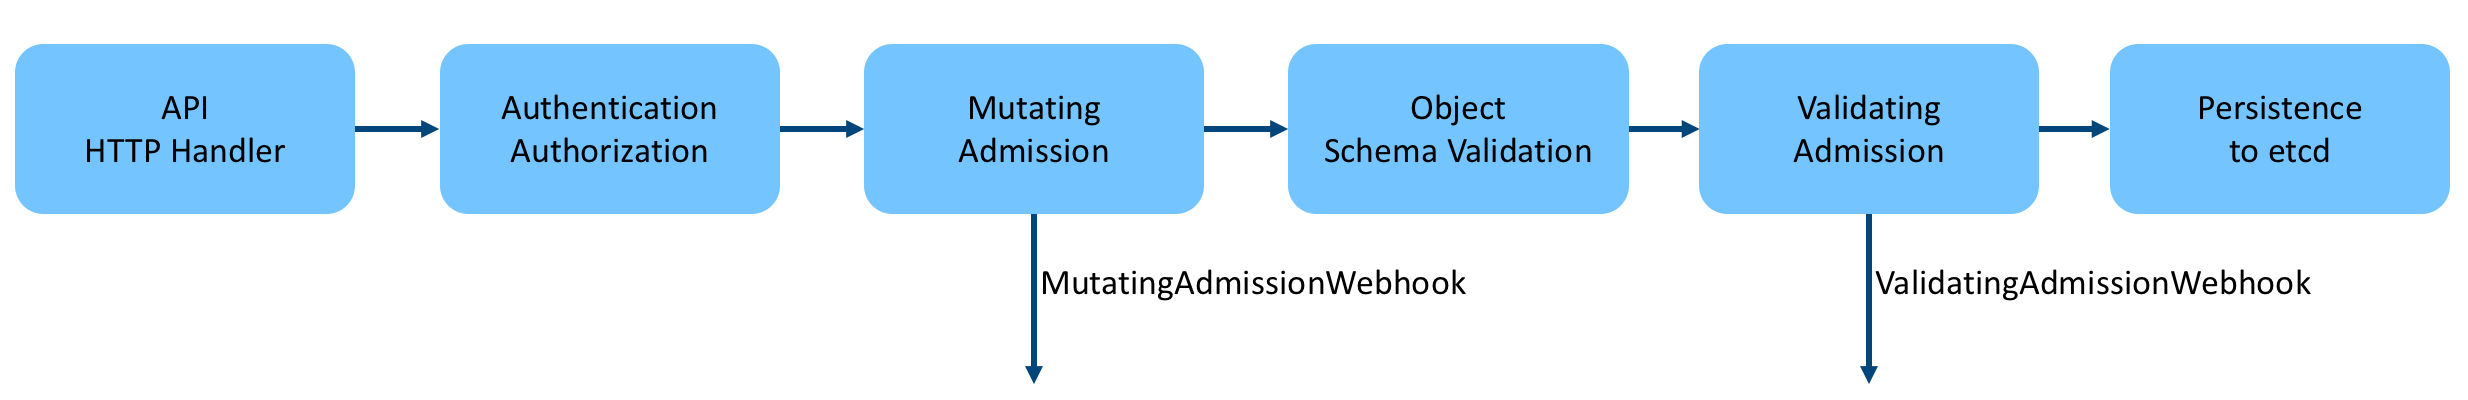 flow of kube-apiserver processing resource requests